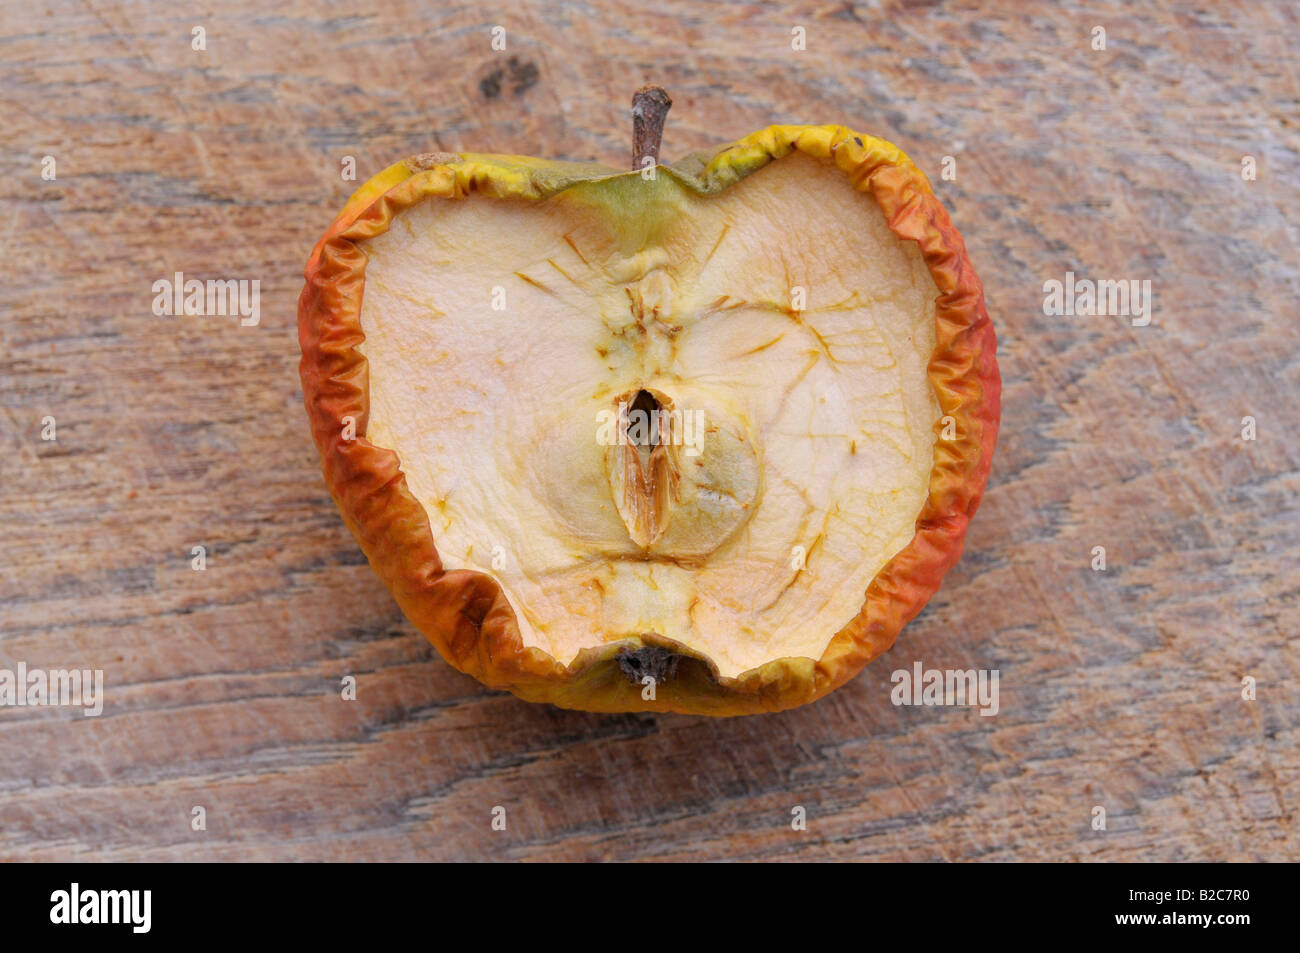 Half of a dried apple Stock Photo